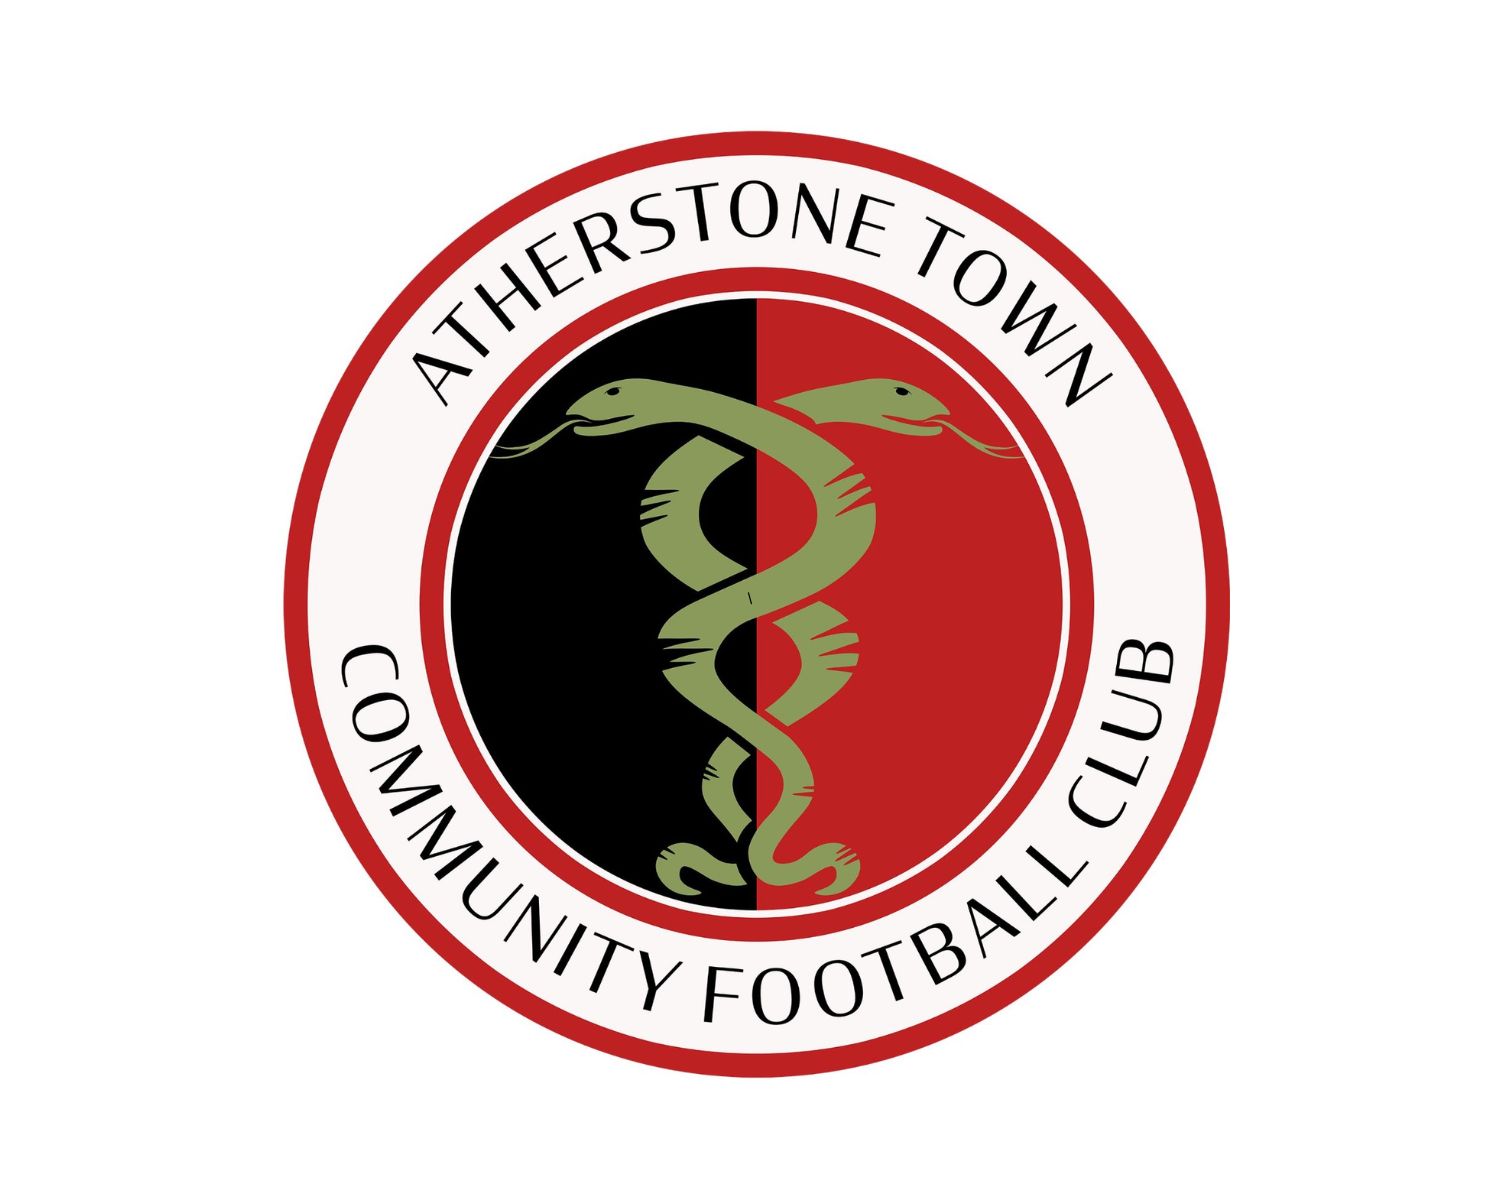 atherstone-town-community-football-club-17-football-club-facts